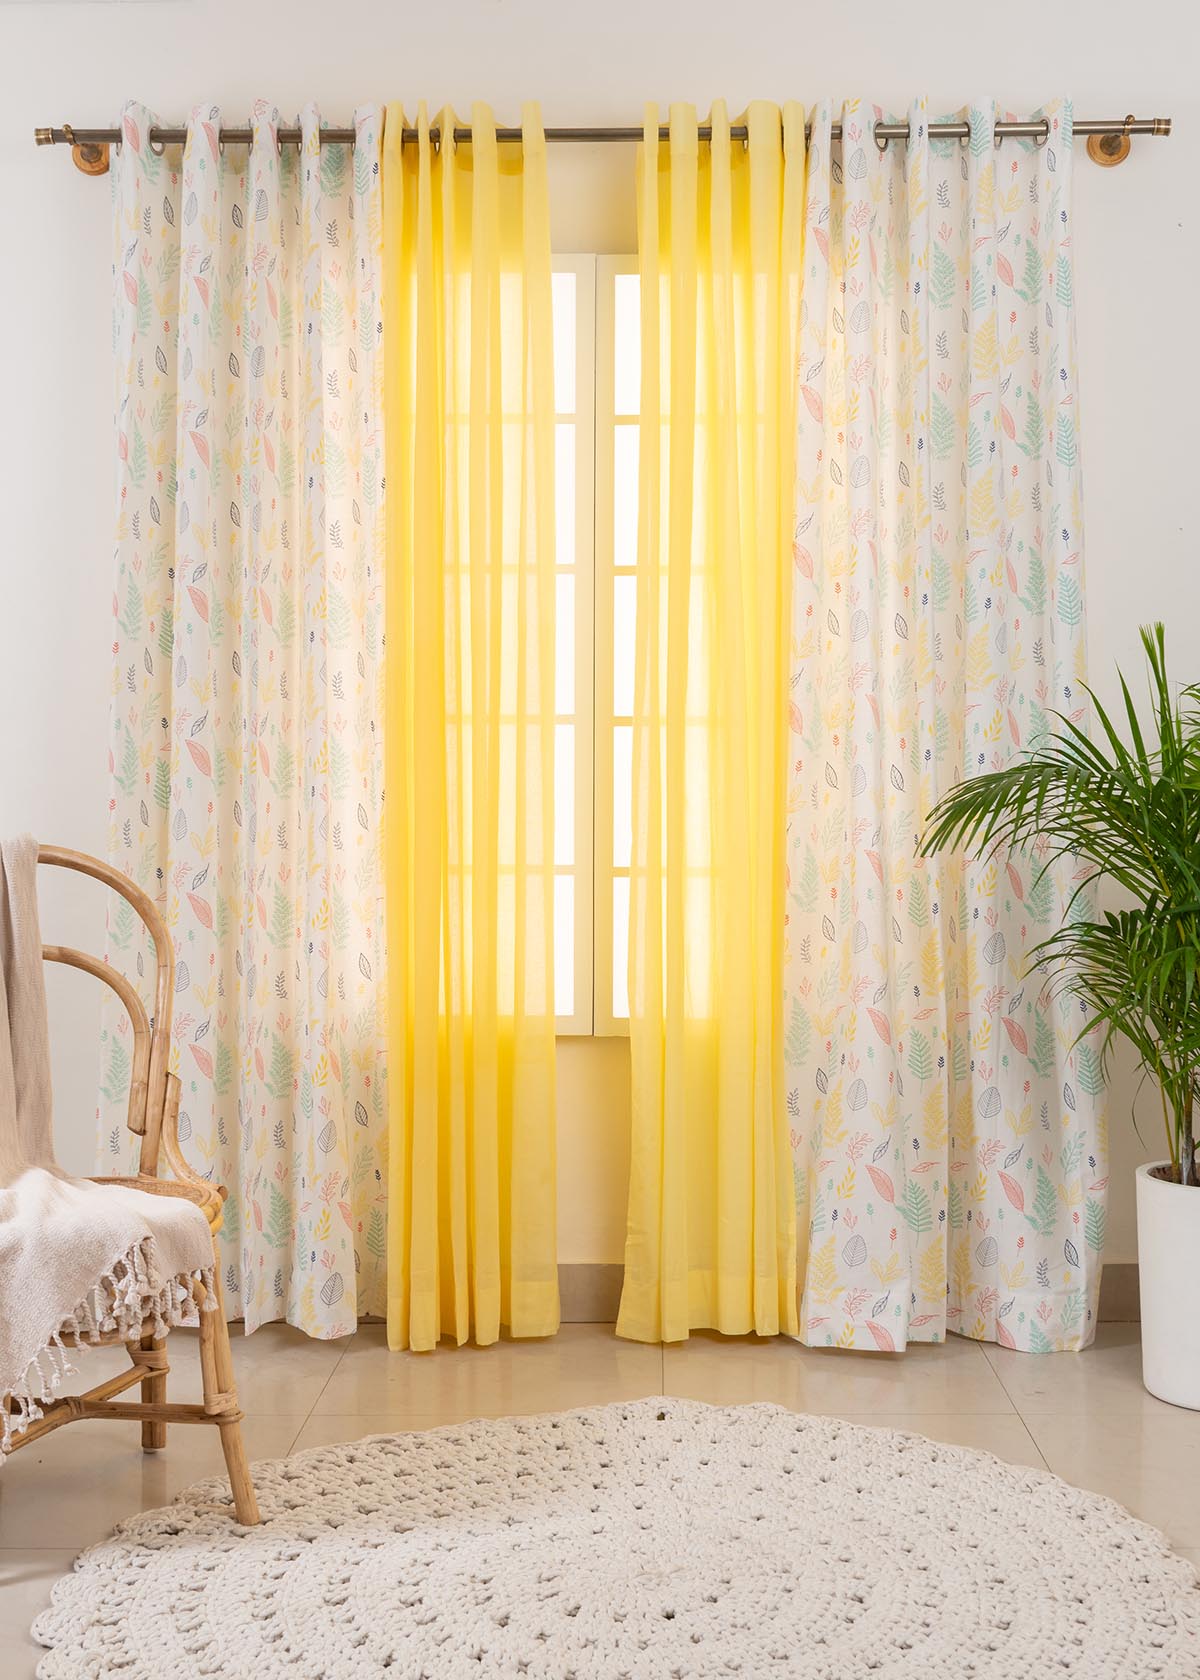 Rustling Leaves In Many Hues,Pale Banana Solid Sheers Set Of 4 Combo Cotton Curtain - Multicolor